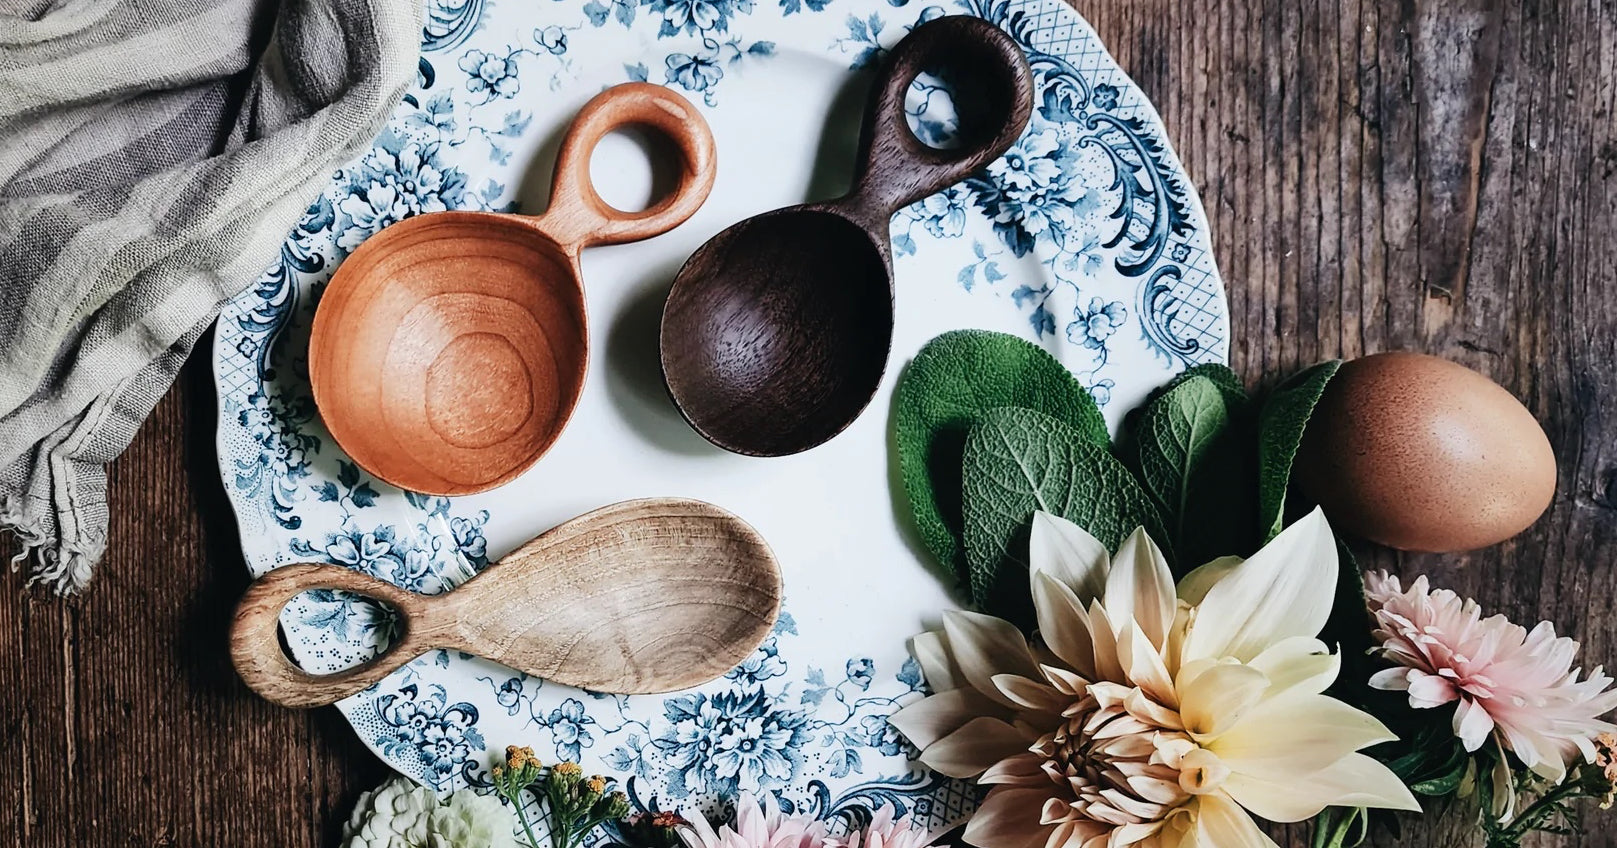 Handmade wooden spoons lay arranged on a table with linens and flowers